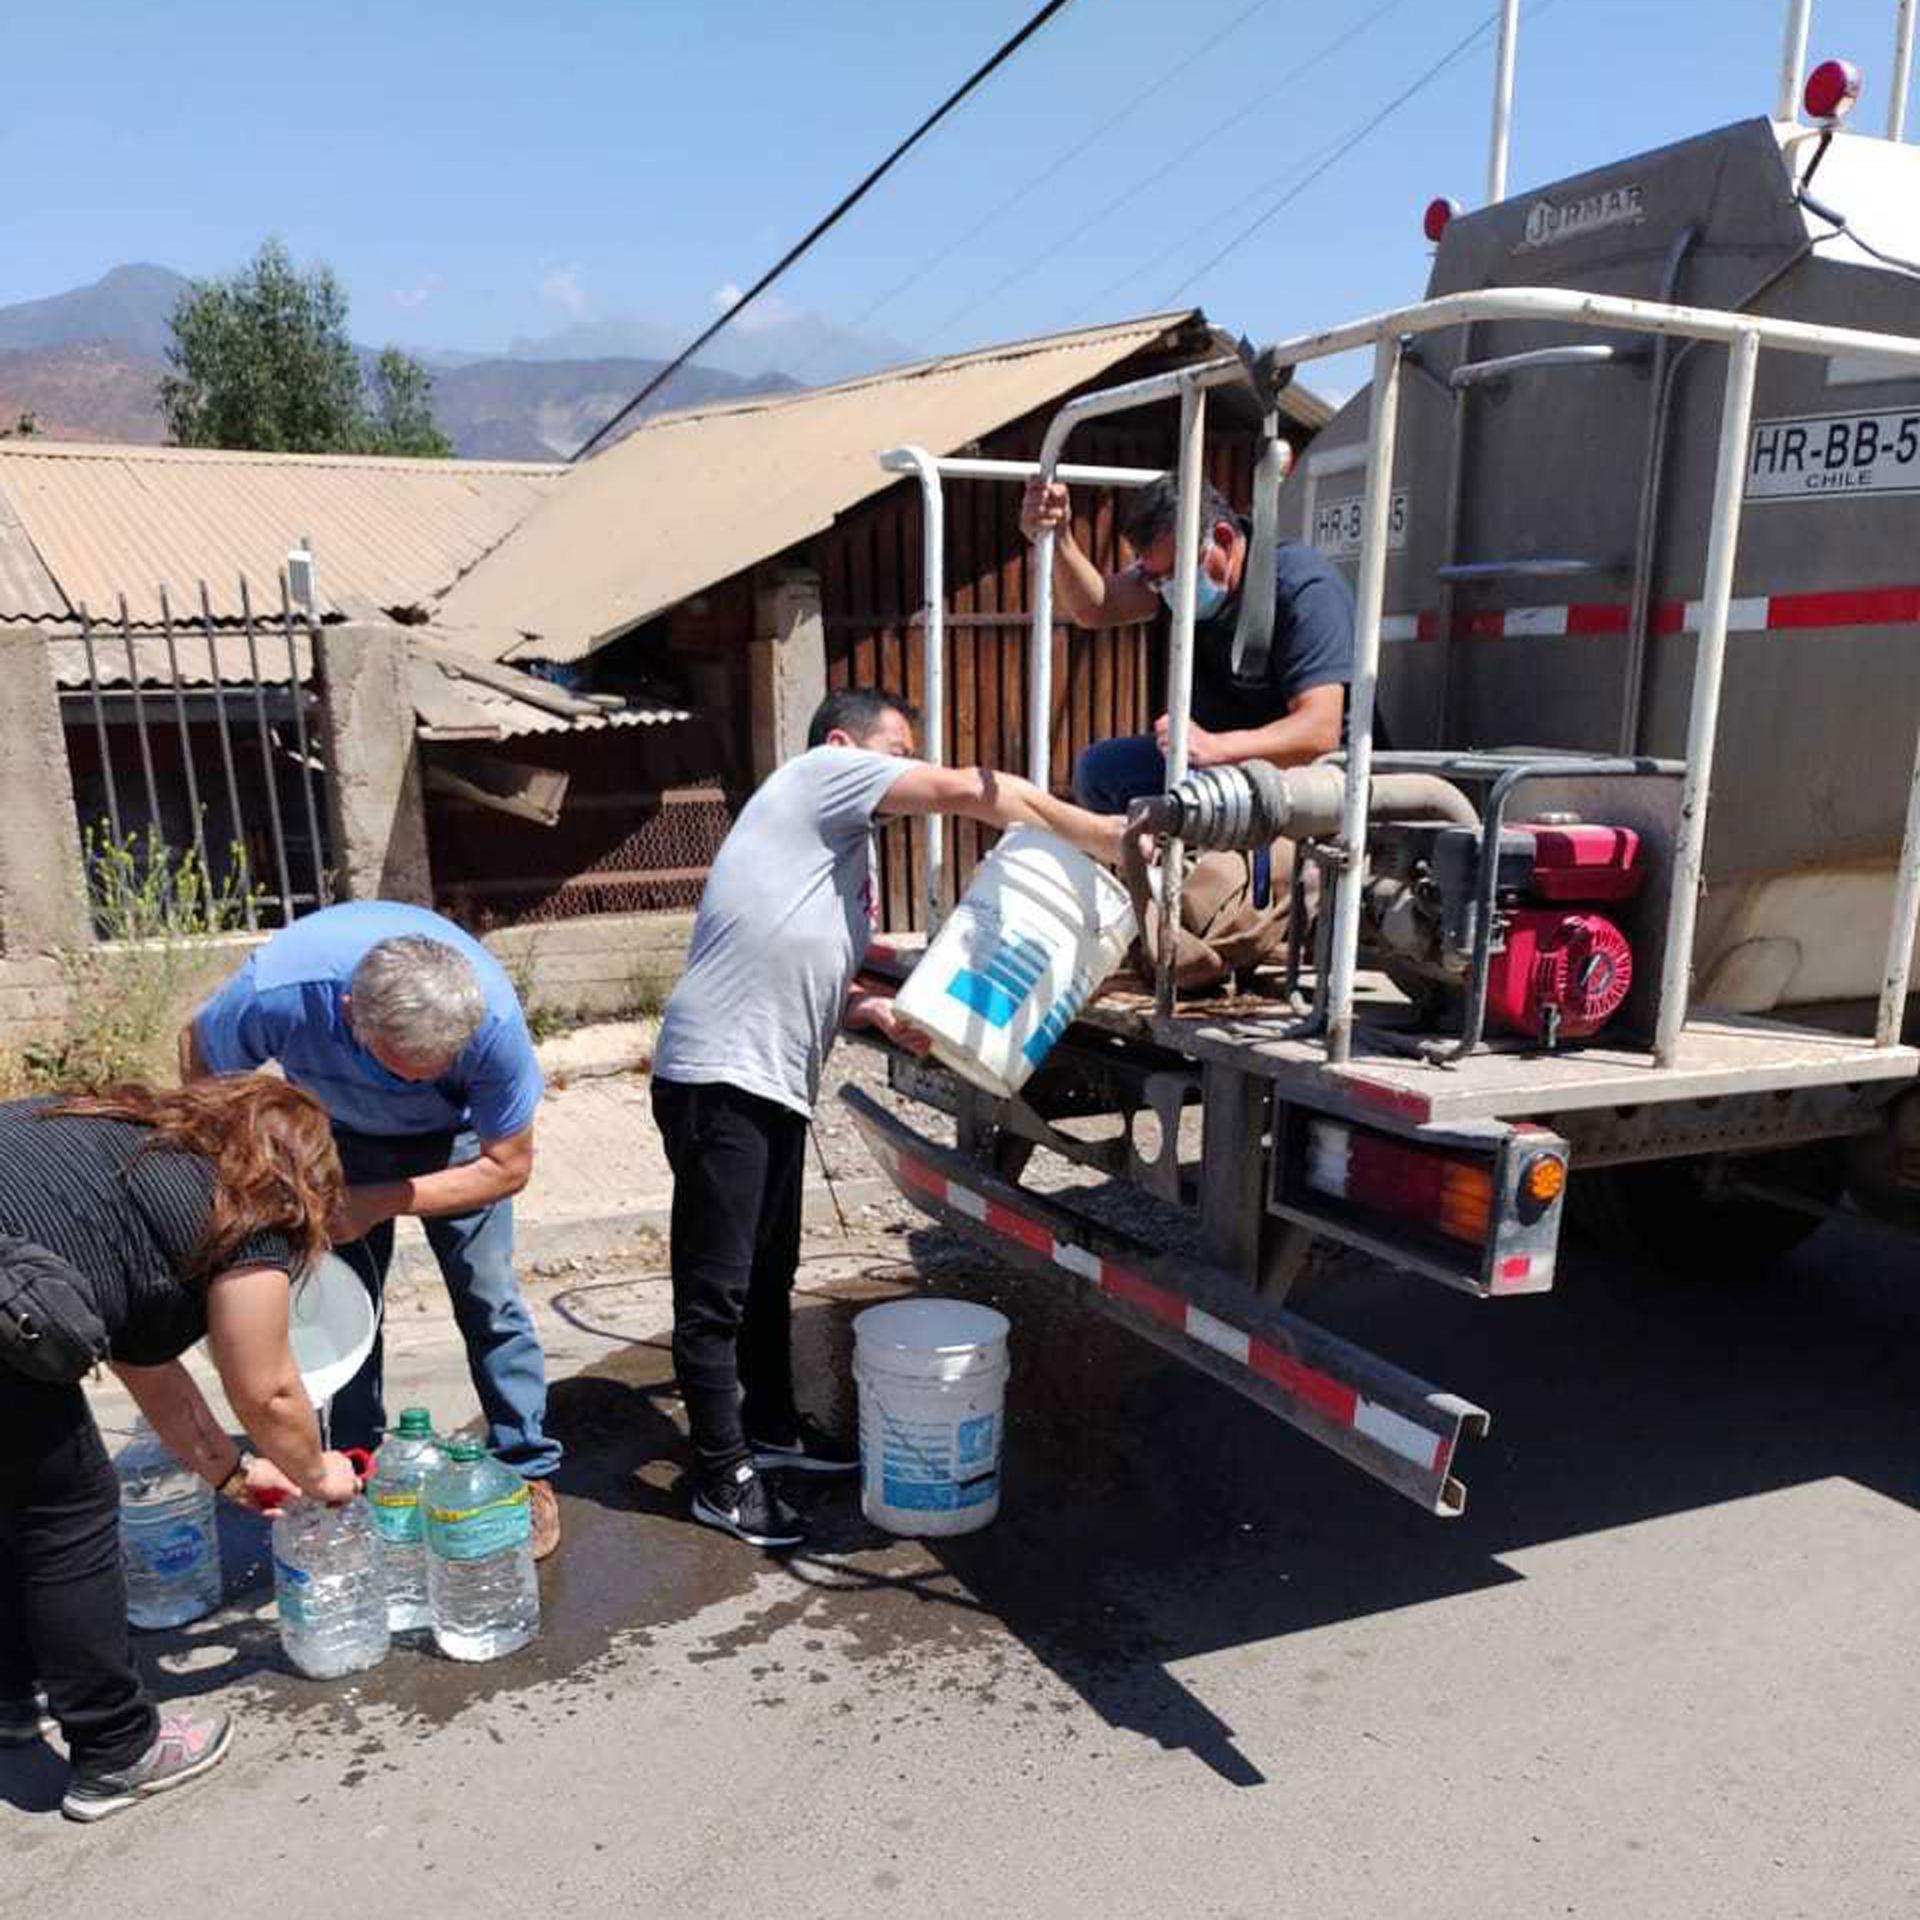 Cistern truck delivering water in Petorca, Chile